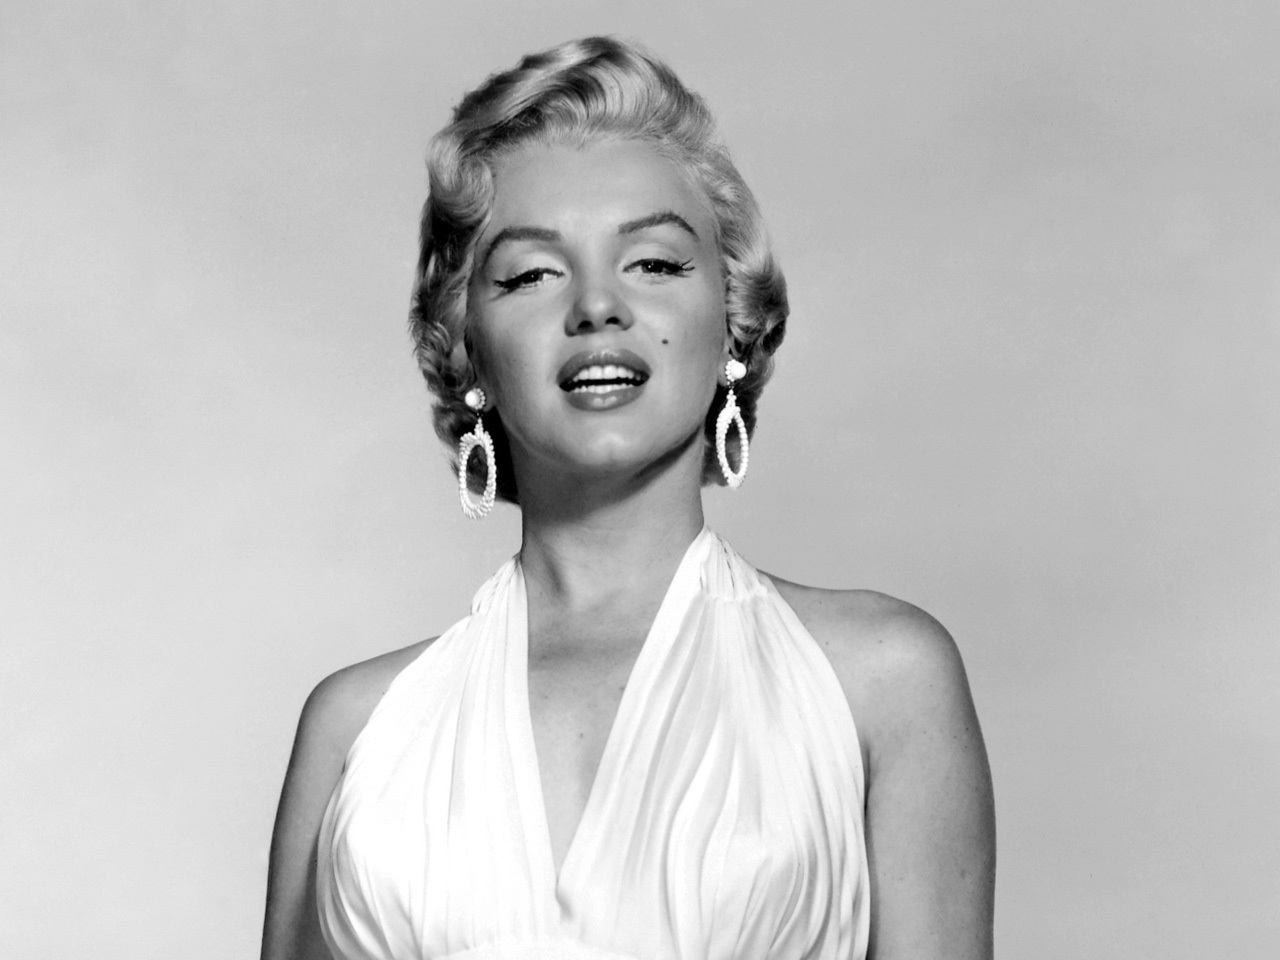 Questions linger 50 years after Marilyn Monroe's death